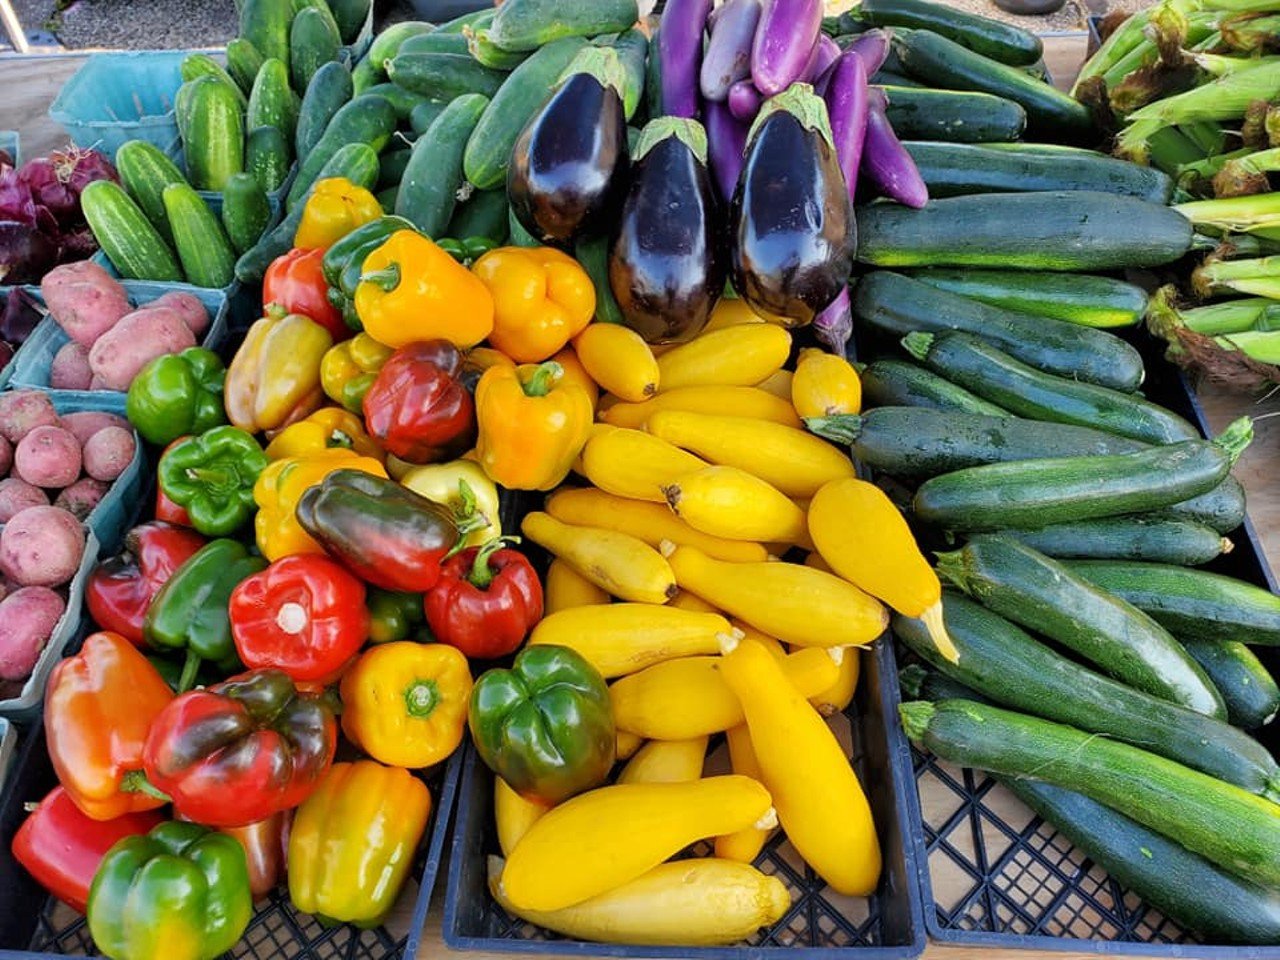  Delhi Farmers' Market
5125 Foley Rd., Delhi Hills
Saturdays 9 a.m.-12 p.m.
Delhi Farmers Market runs every Saturday from May 28 to August 27.  They are a family-friendly farmers market that features local produce, baked goods and crafts.